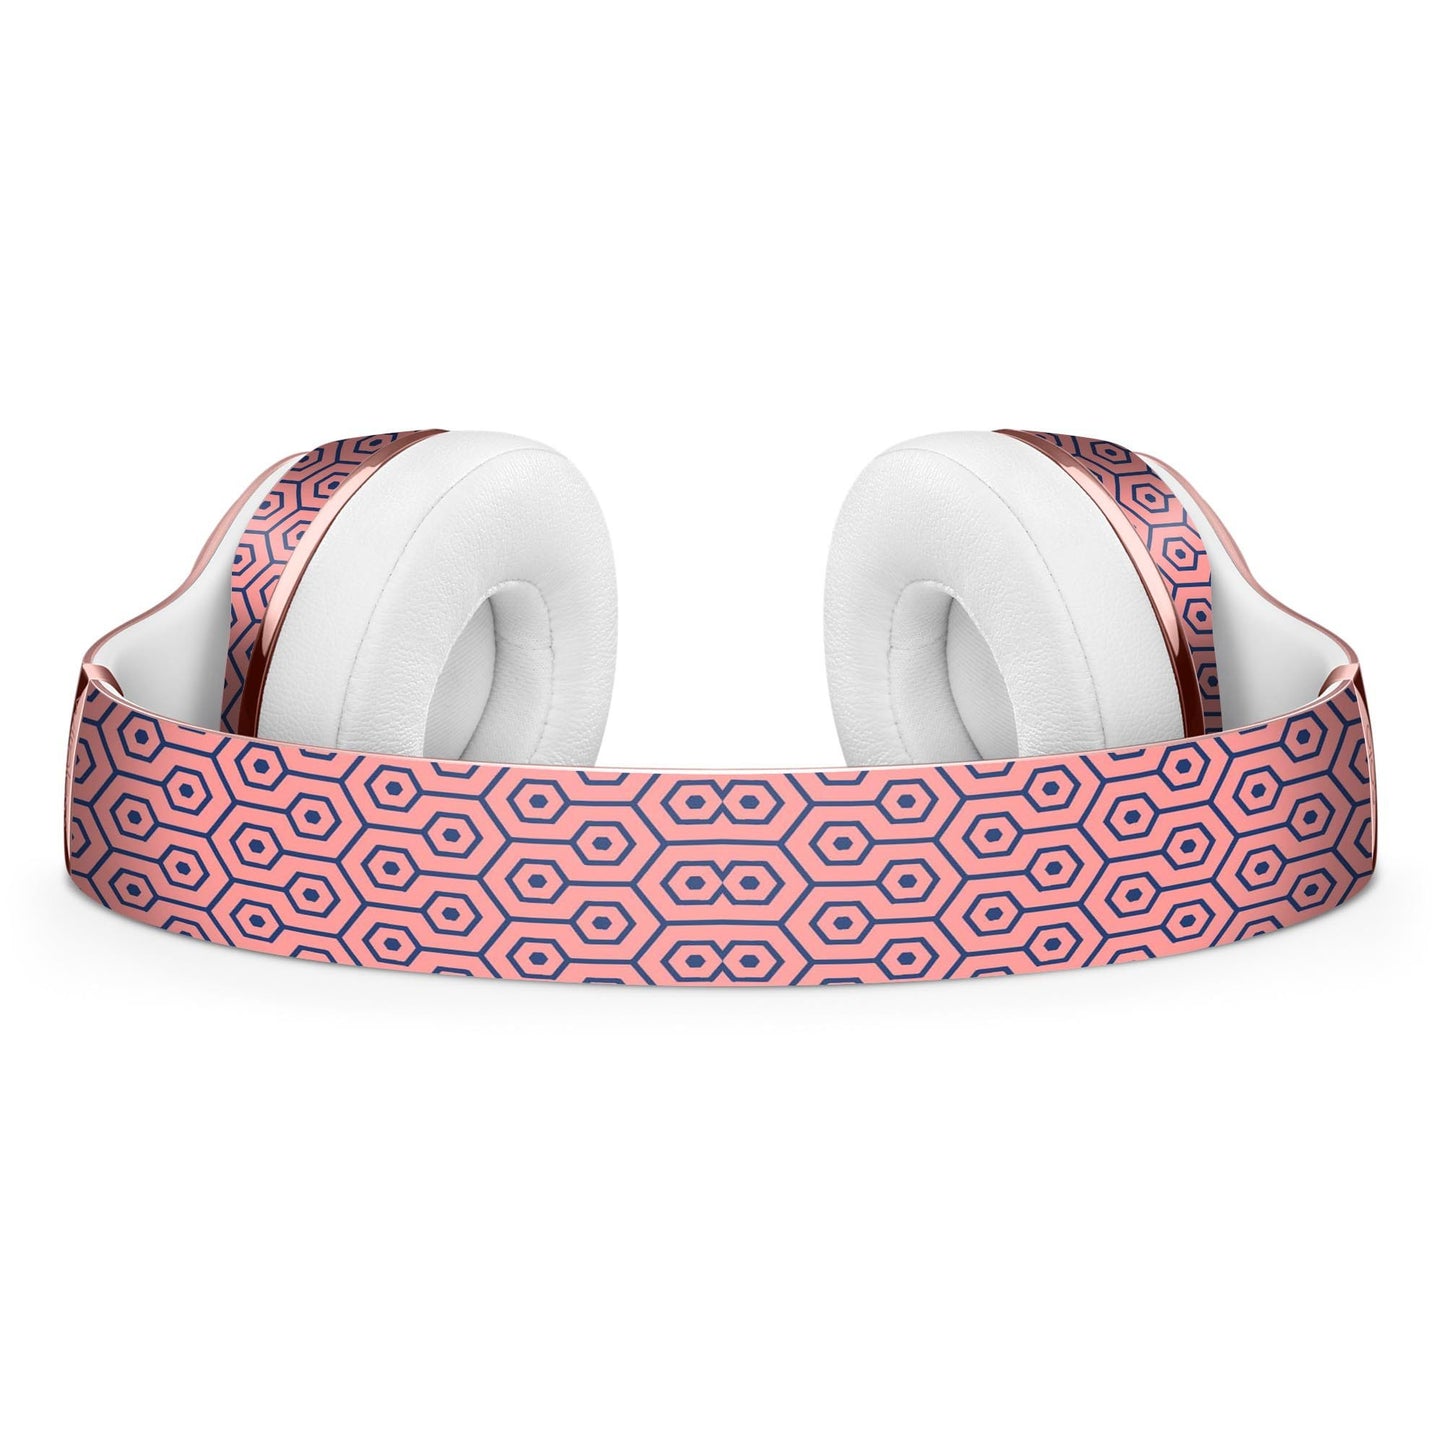 Navy Cells Over Coral  2 Full-Body Skin Kit for the Beats by Dre Solo